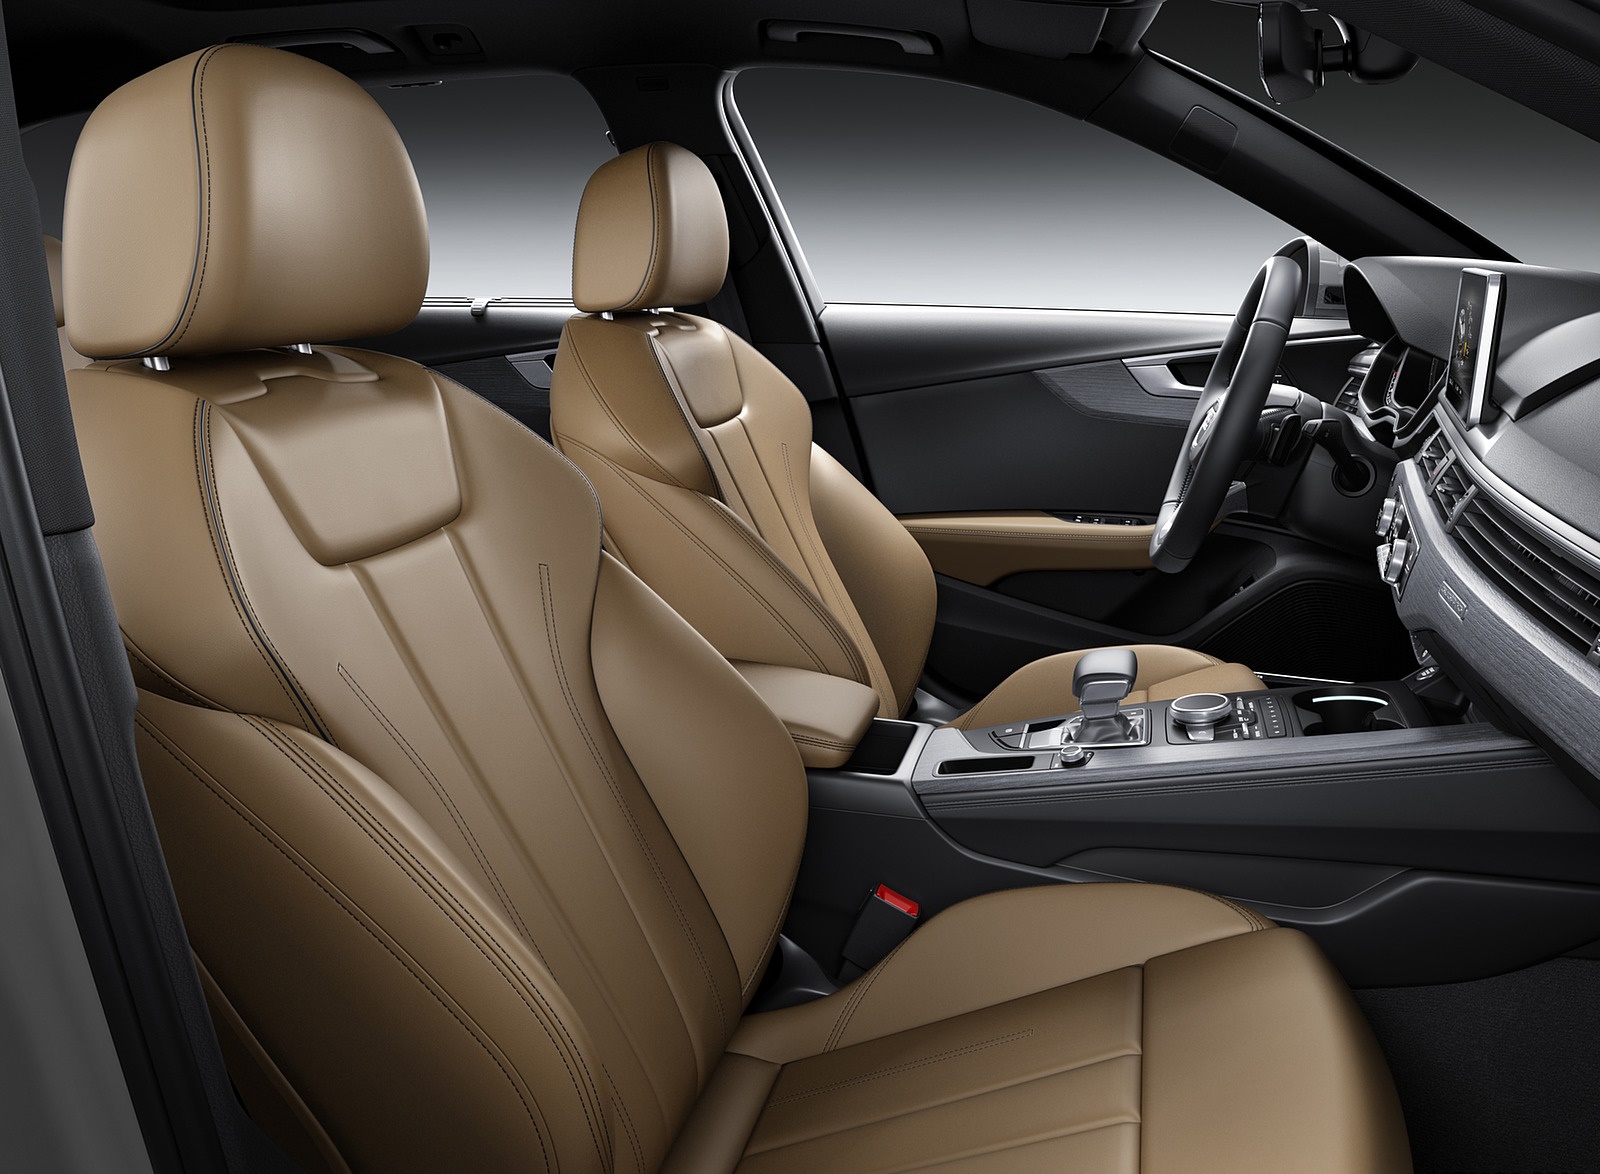 2019 Audi A4 Avant Interior Front Seats Wallpapers #18 of 35